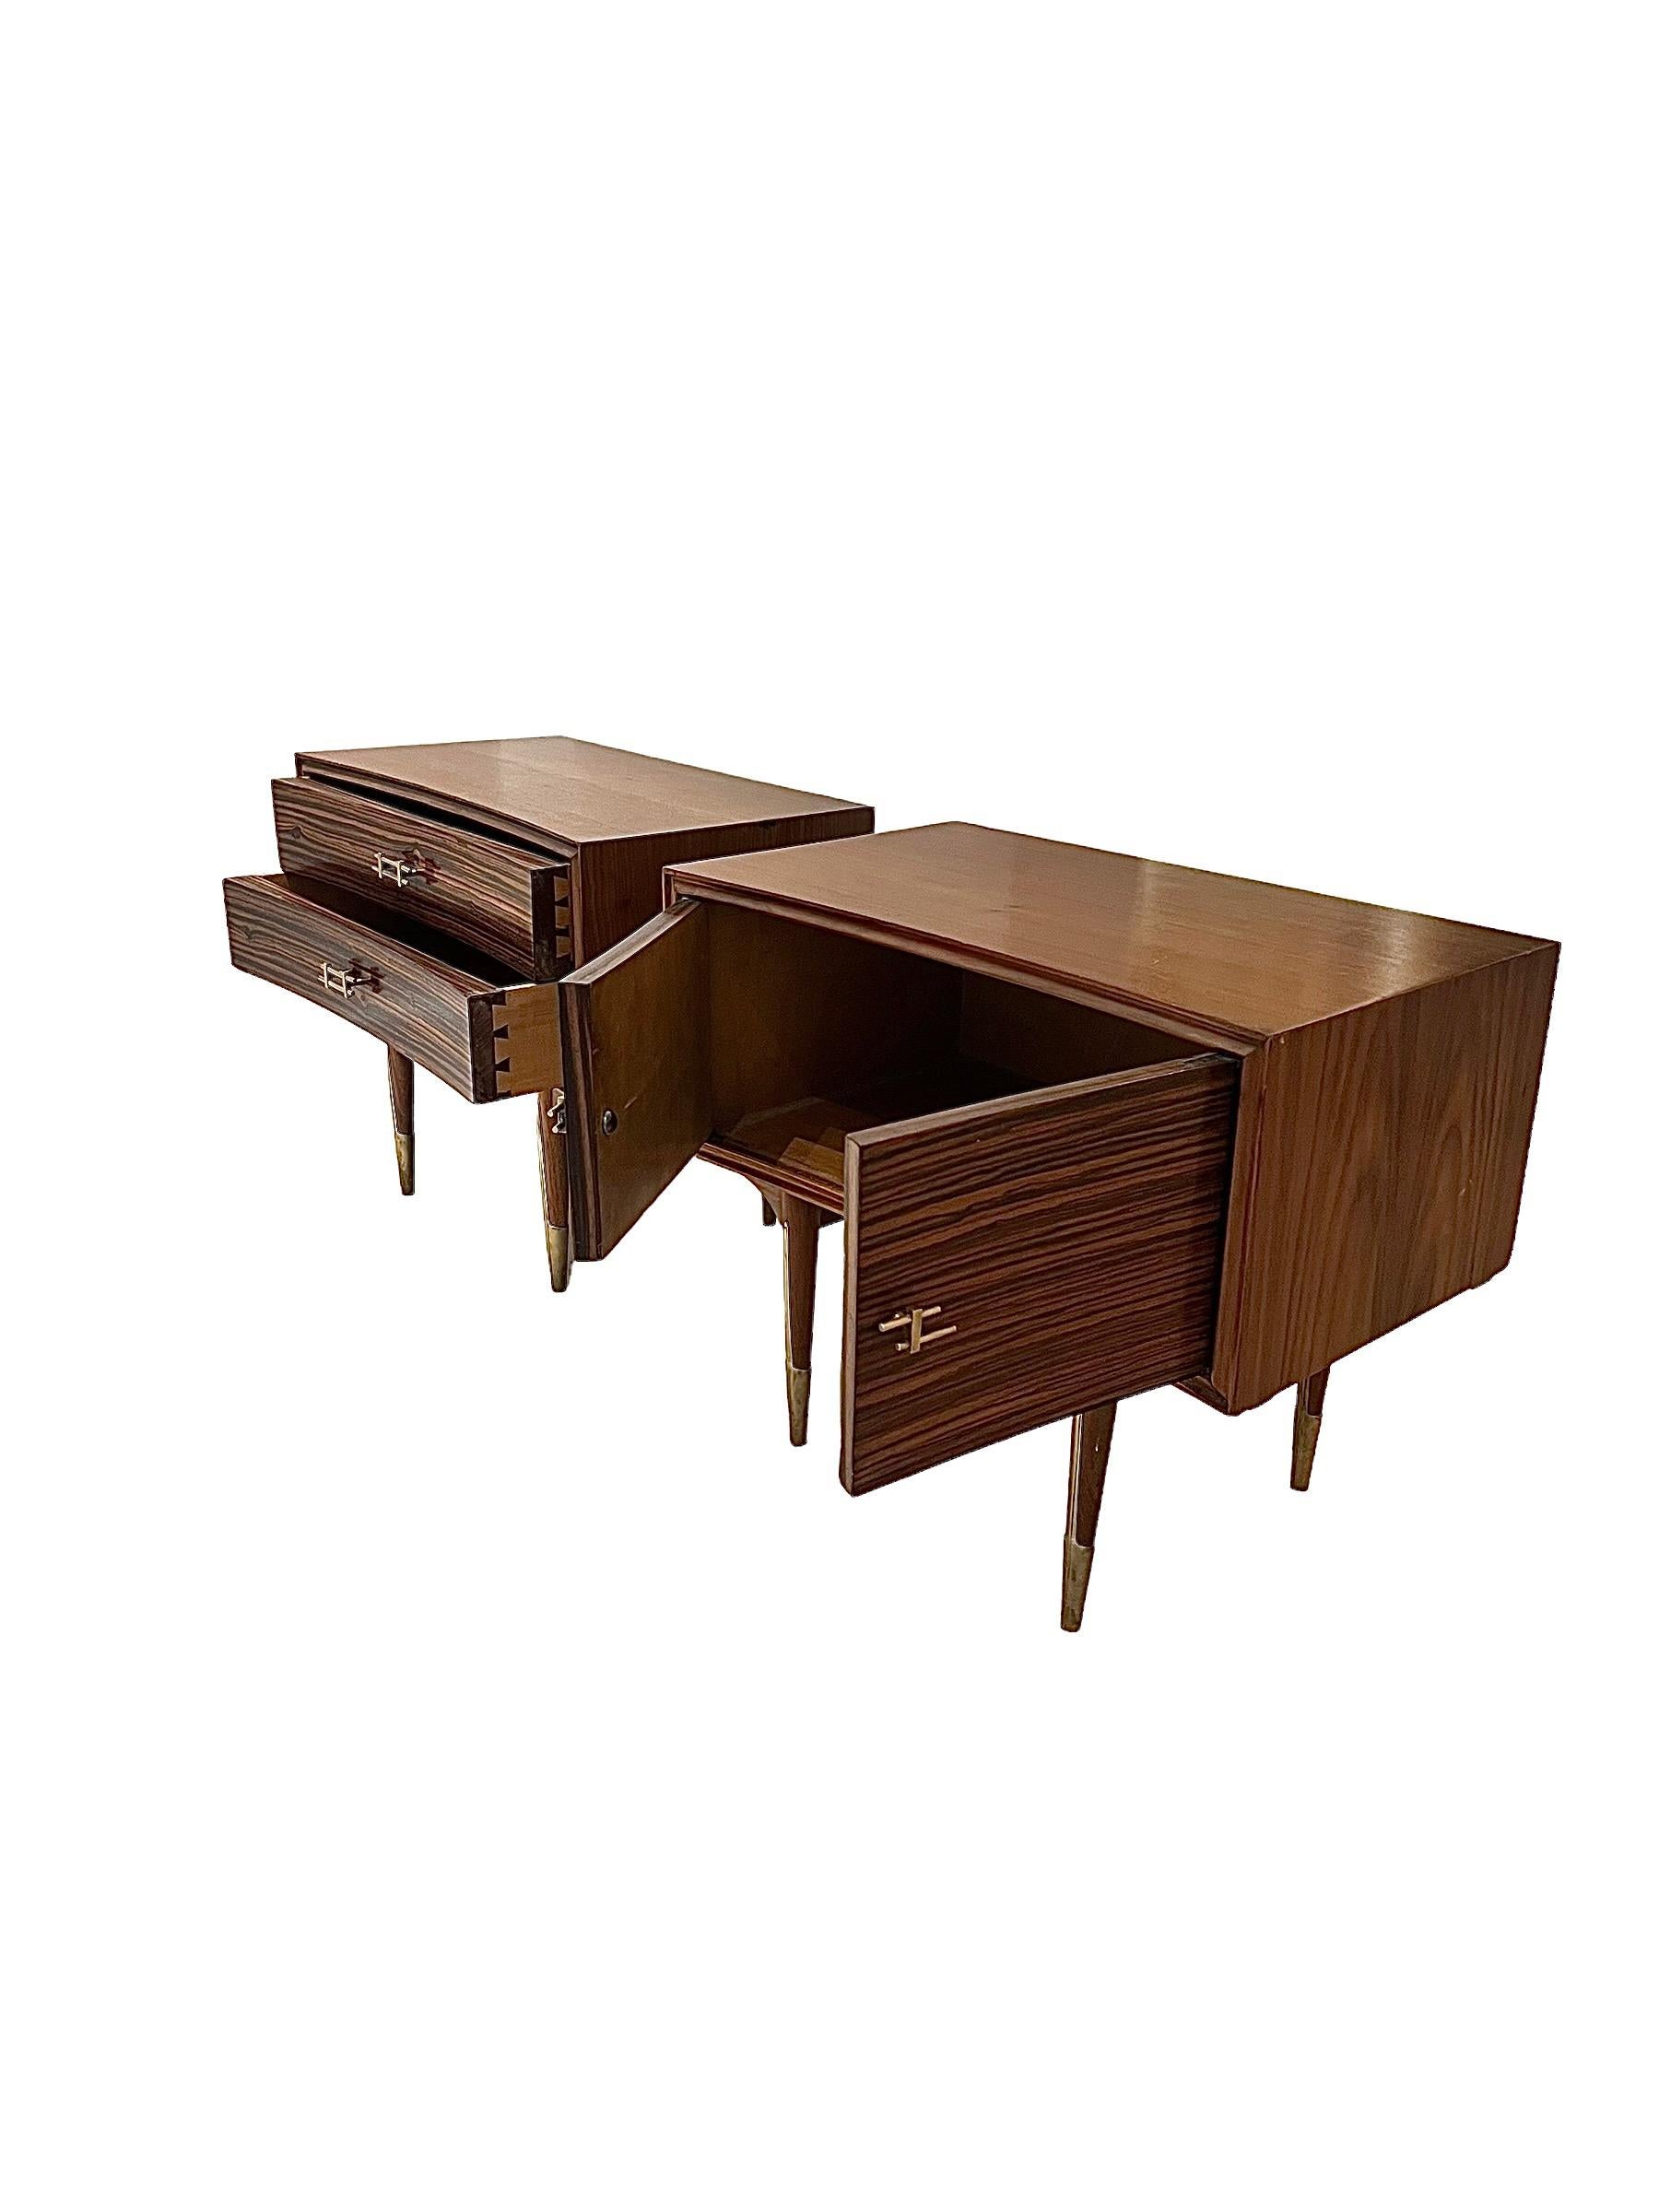 Presenting a striking pair of rosewood nightstands, hailing from the chic era of the 1960s. These elegant pieces are adorned with brass handles, showcasing a timeless fusion of form and function.

Both nightstands share the same graceful shape, yet